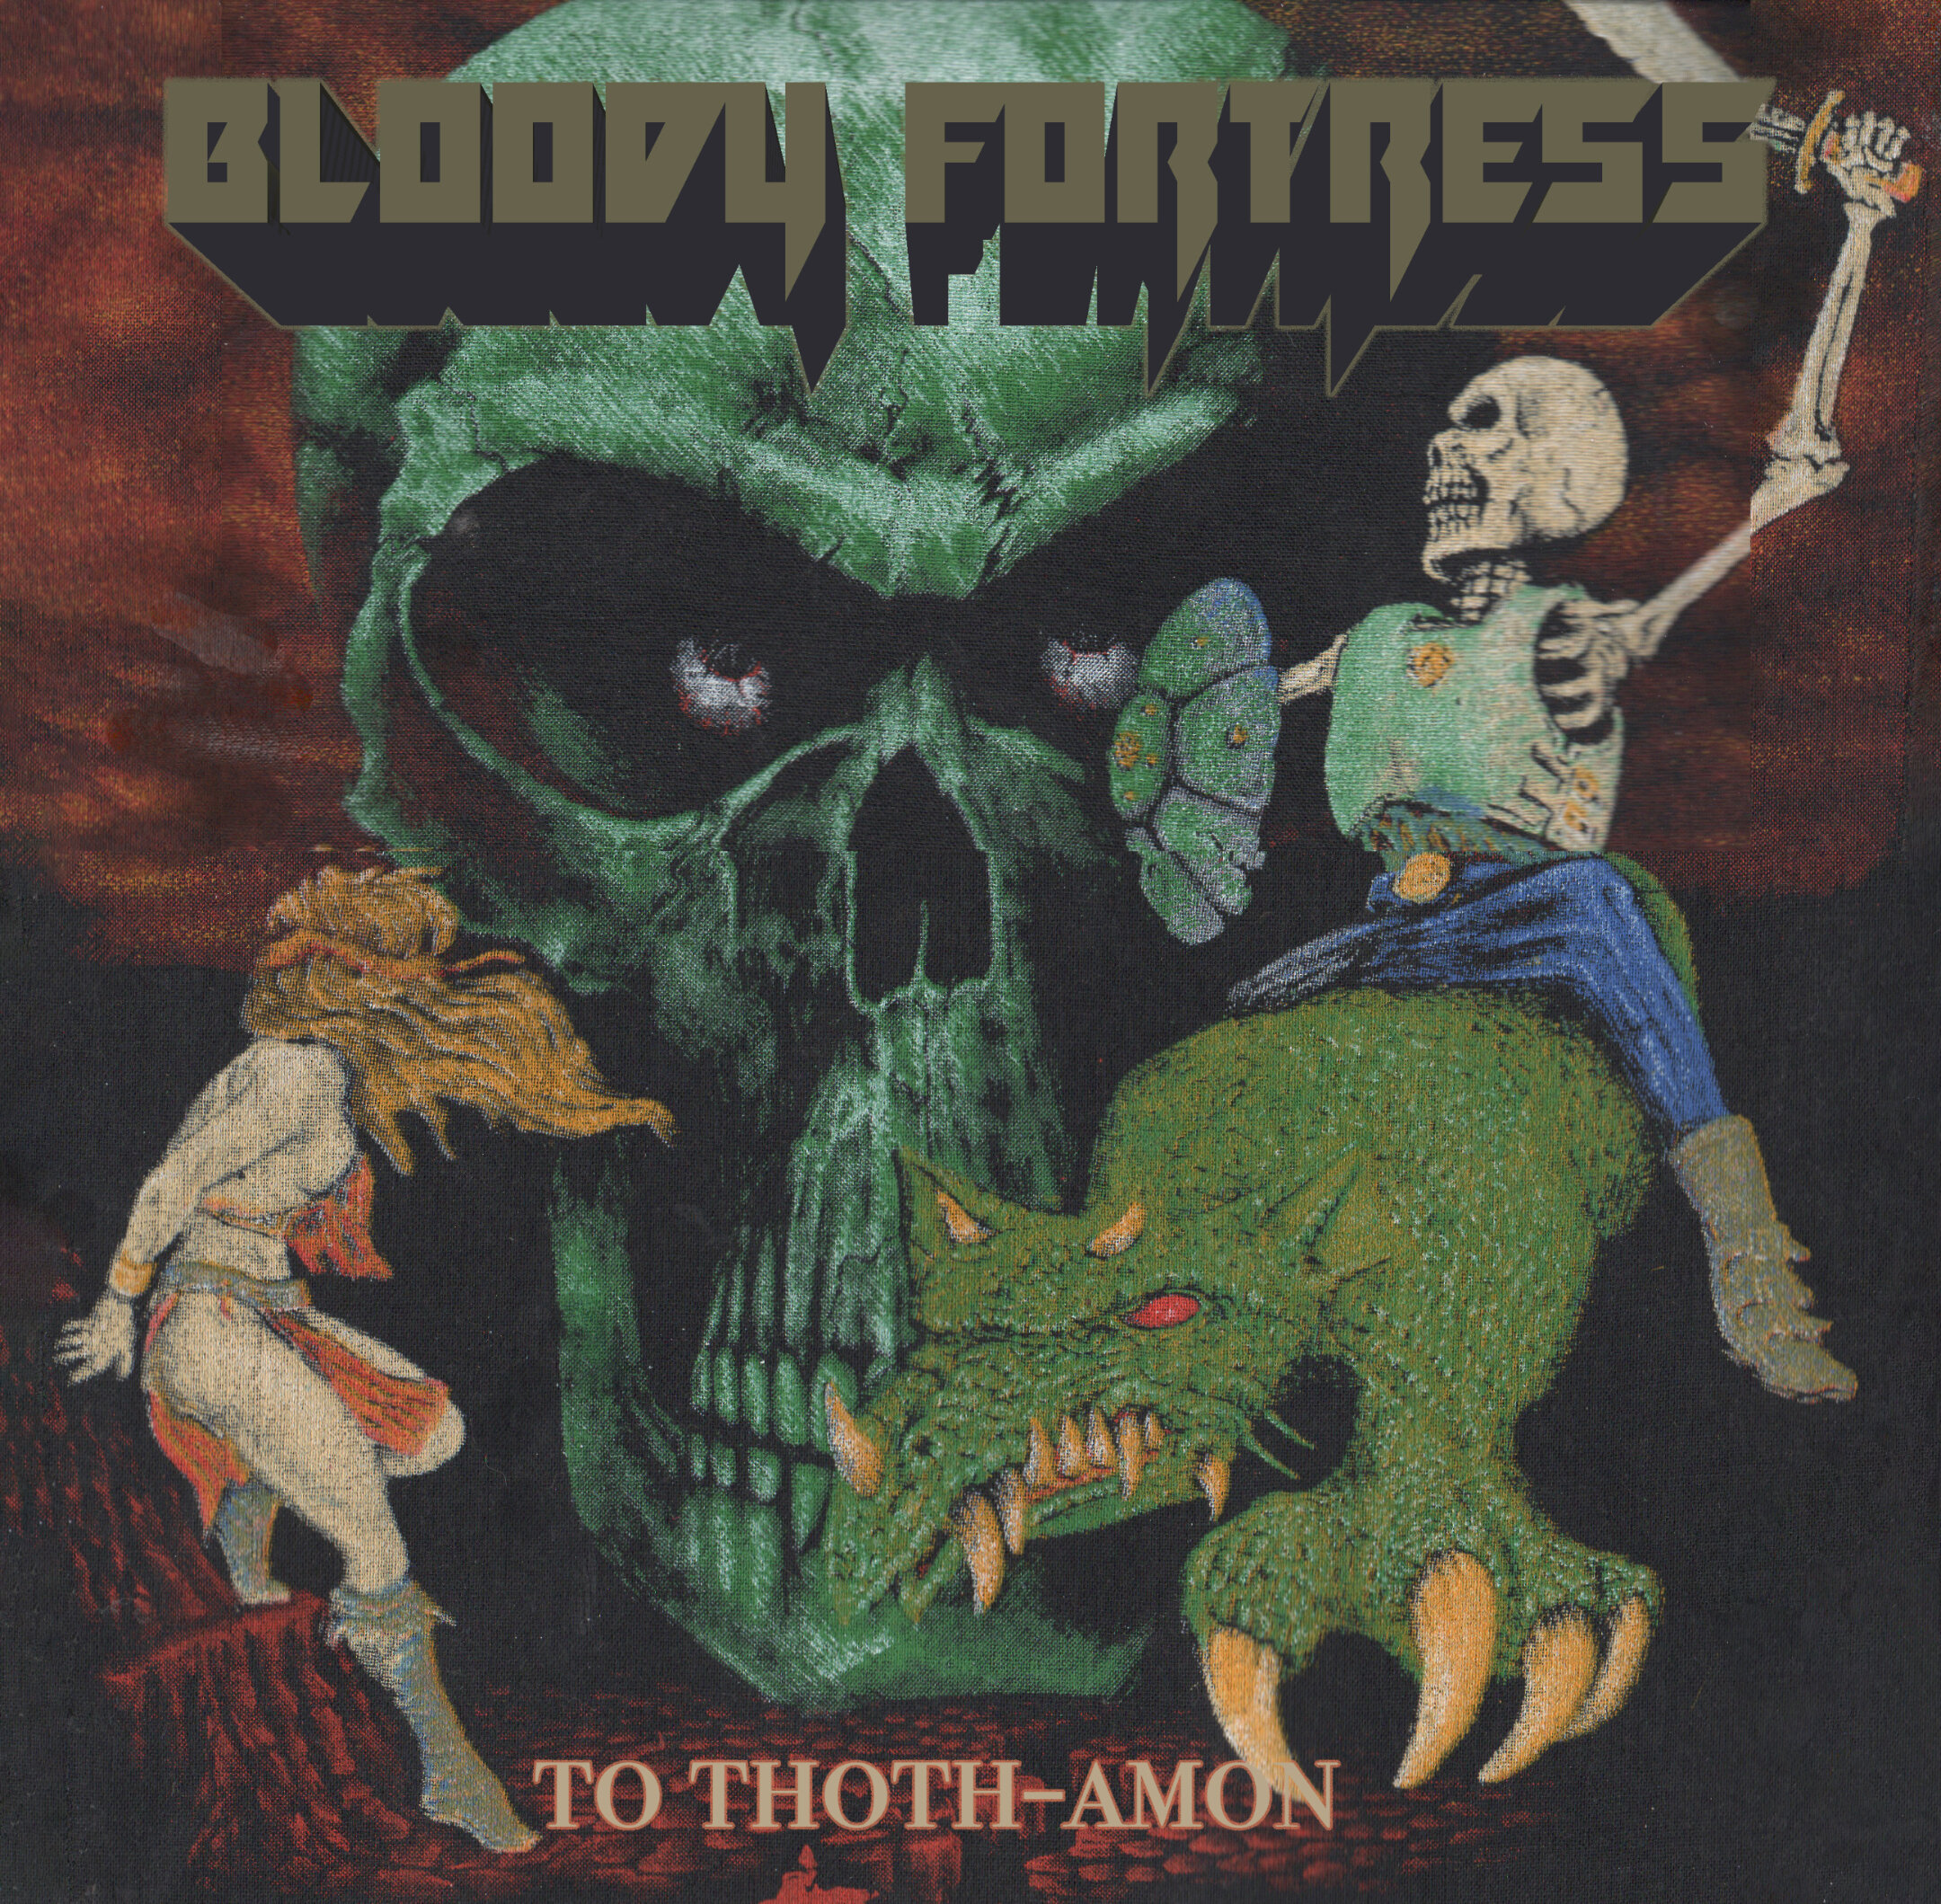 Bloody Fortress - To Thoth-Amon EP